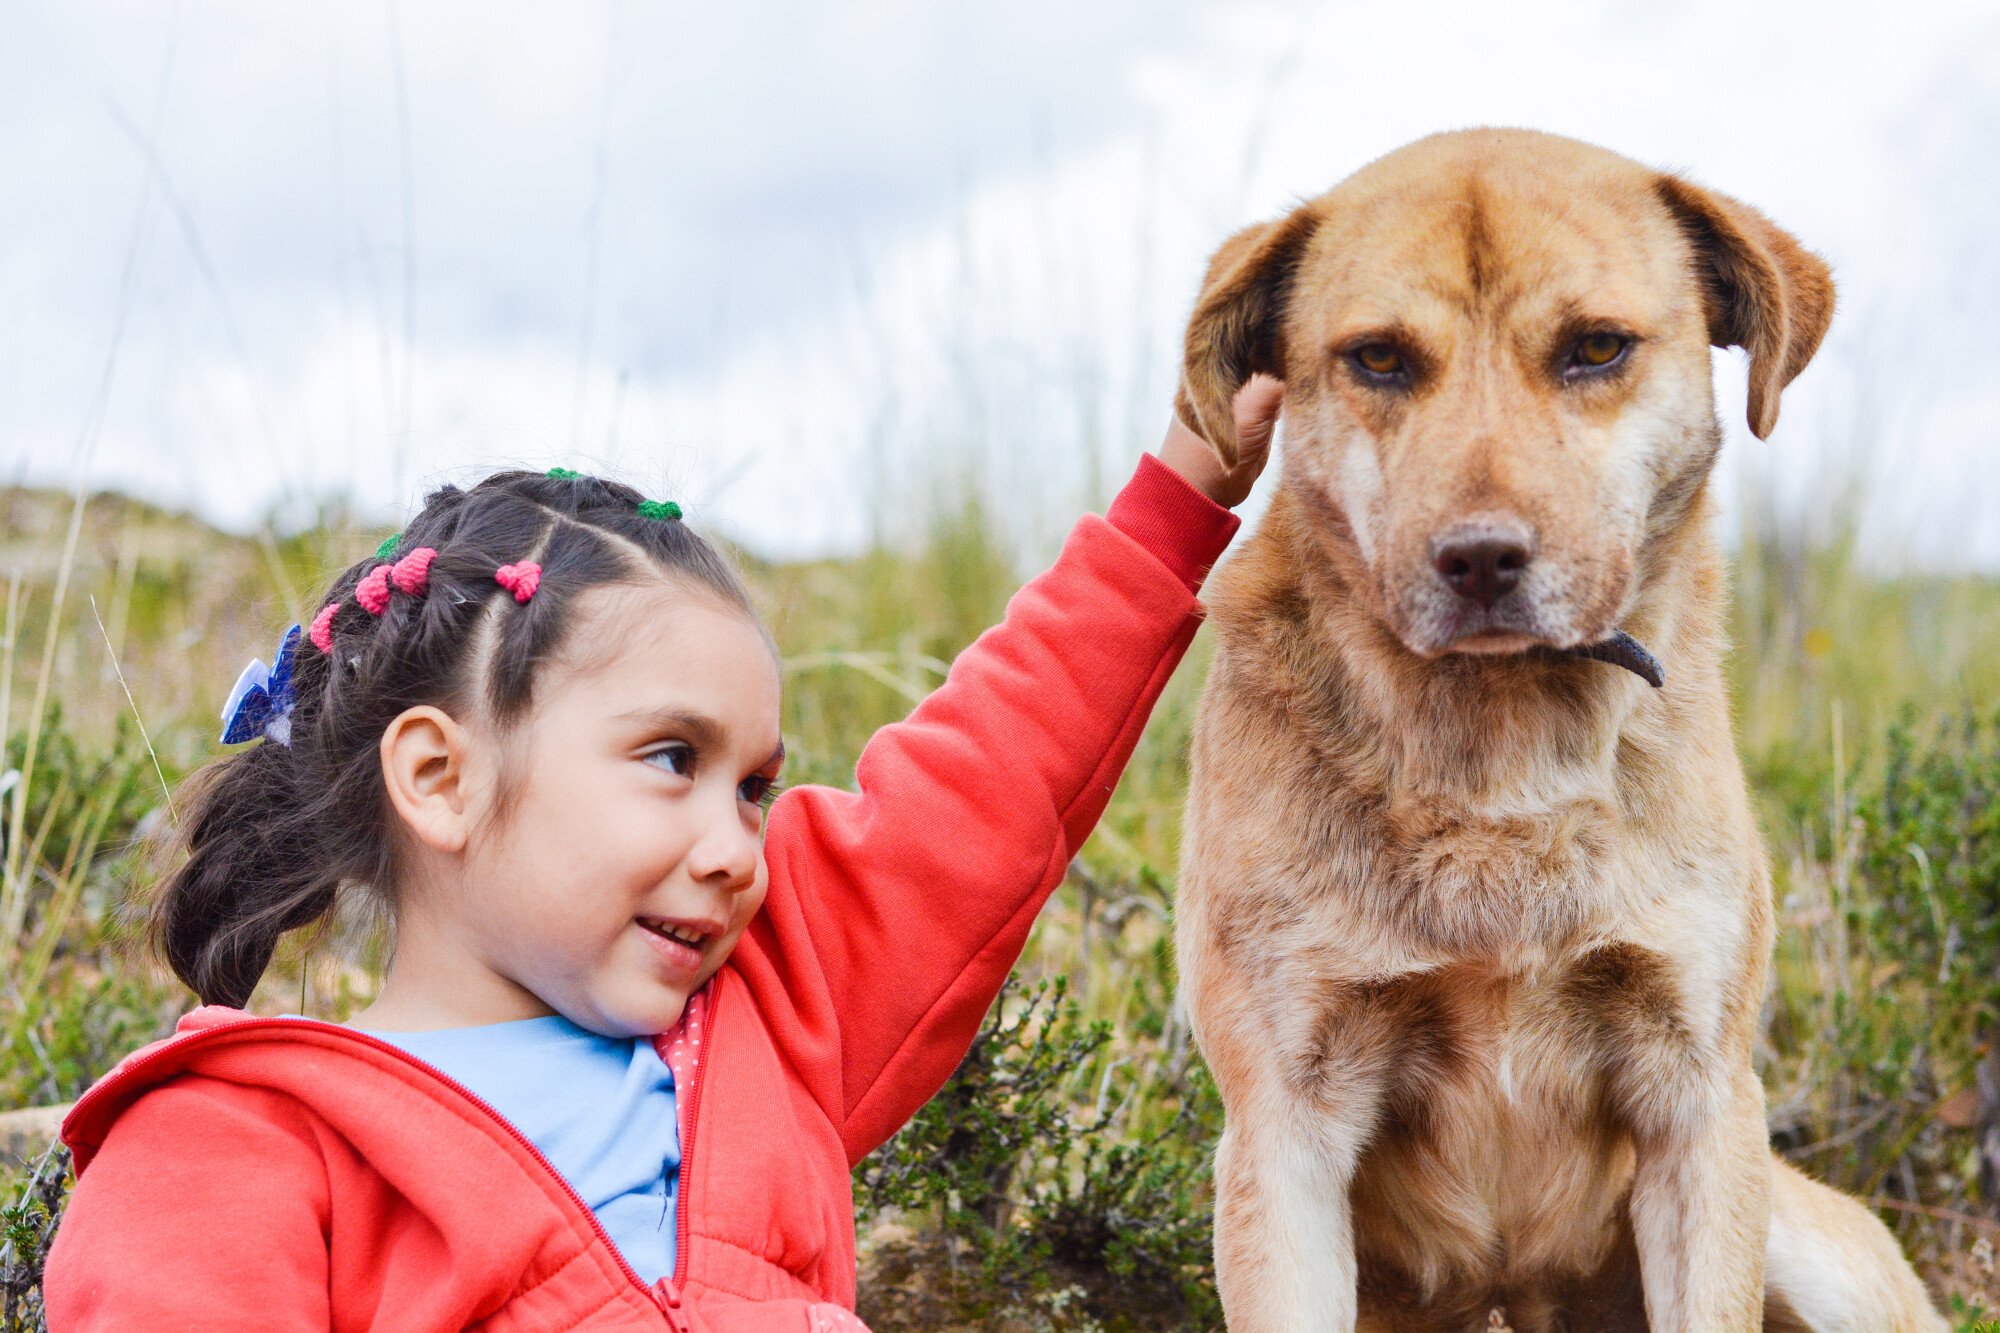 5 Important Things To Remember Before Allowing Pets in a Community